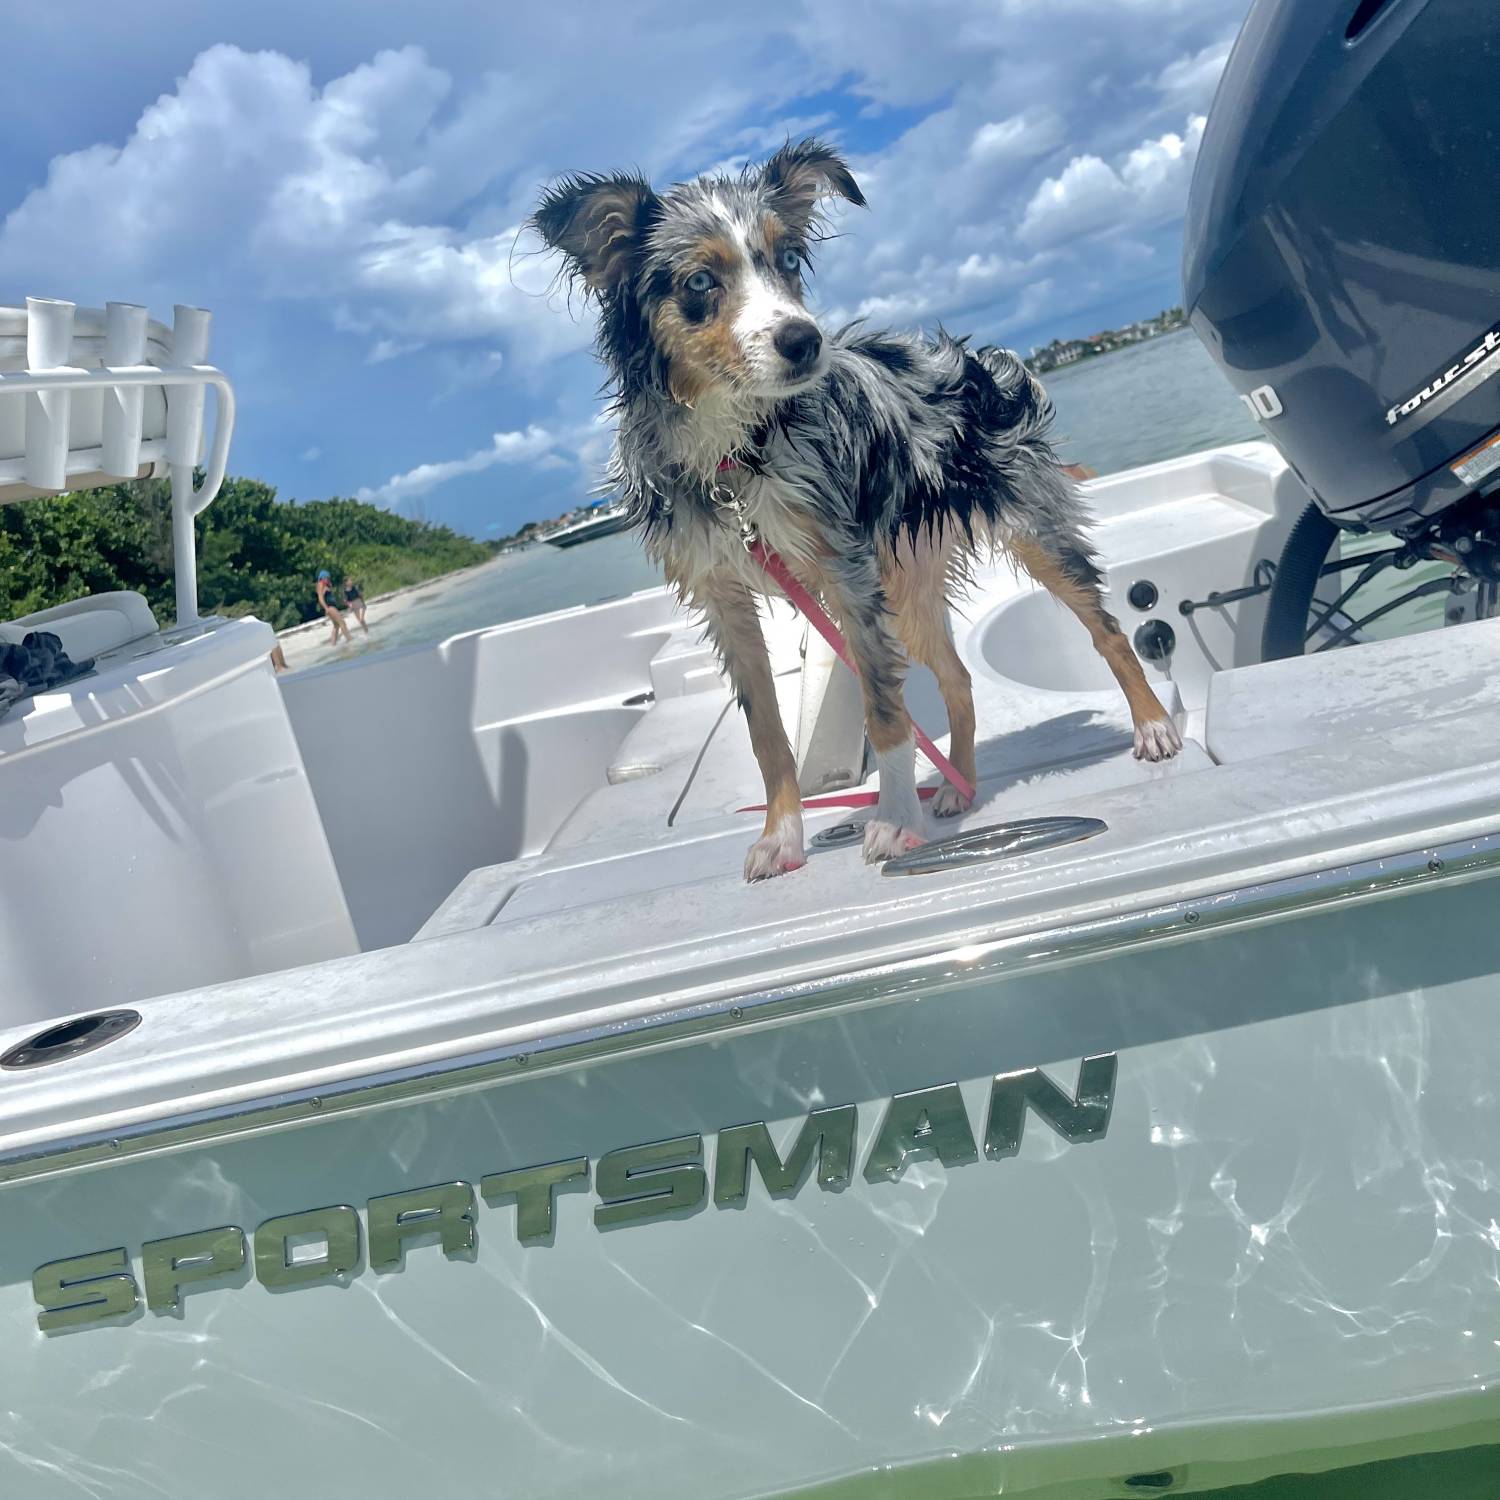 Title: Remi girl on “Hallin Them In” - On board their Sportsman Masters 247OE Bay Boat - Location: Sarasota beach. Participating in the Photo Contest #SportsmanSeptember